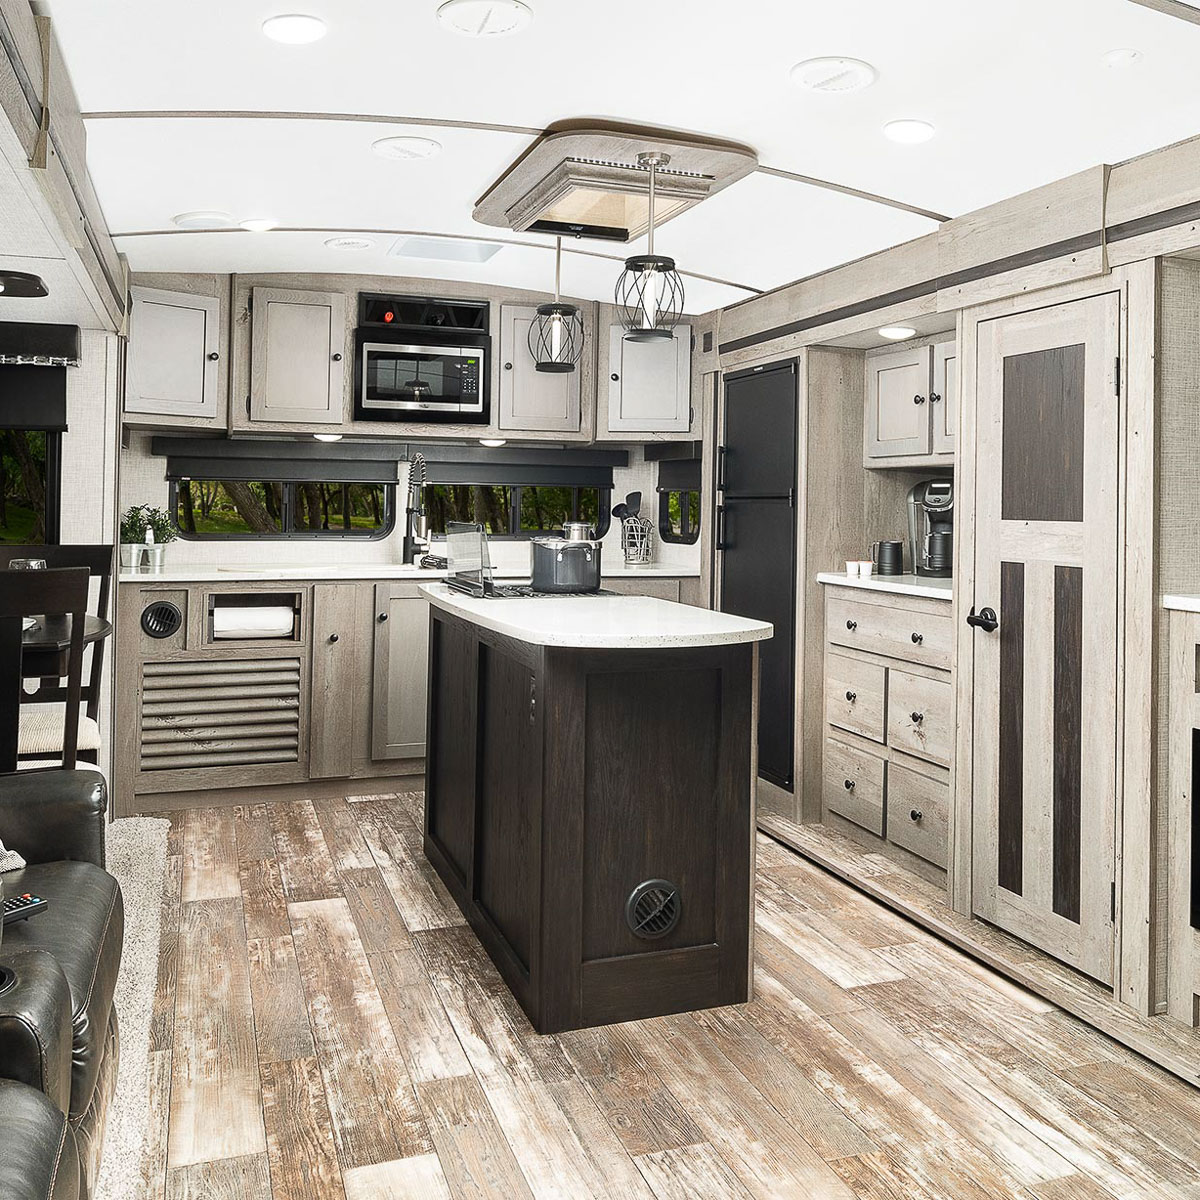 bunkhouse travel trailer with kitchen island